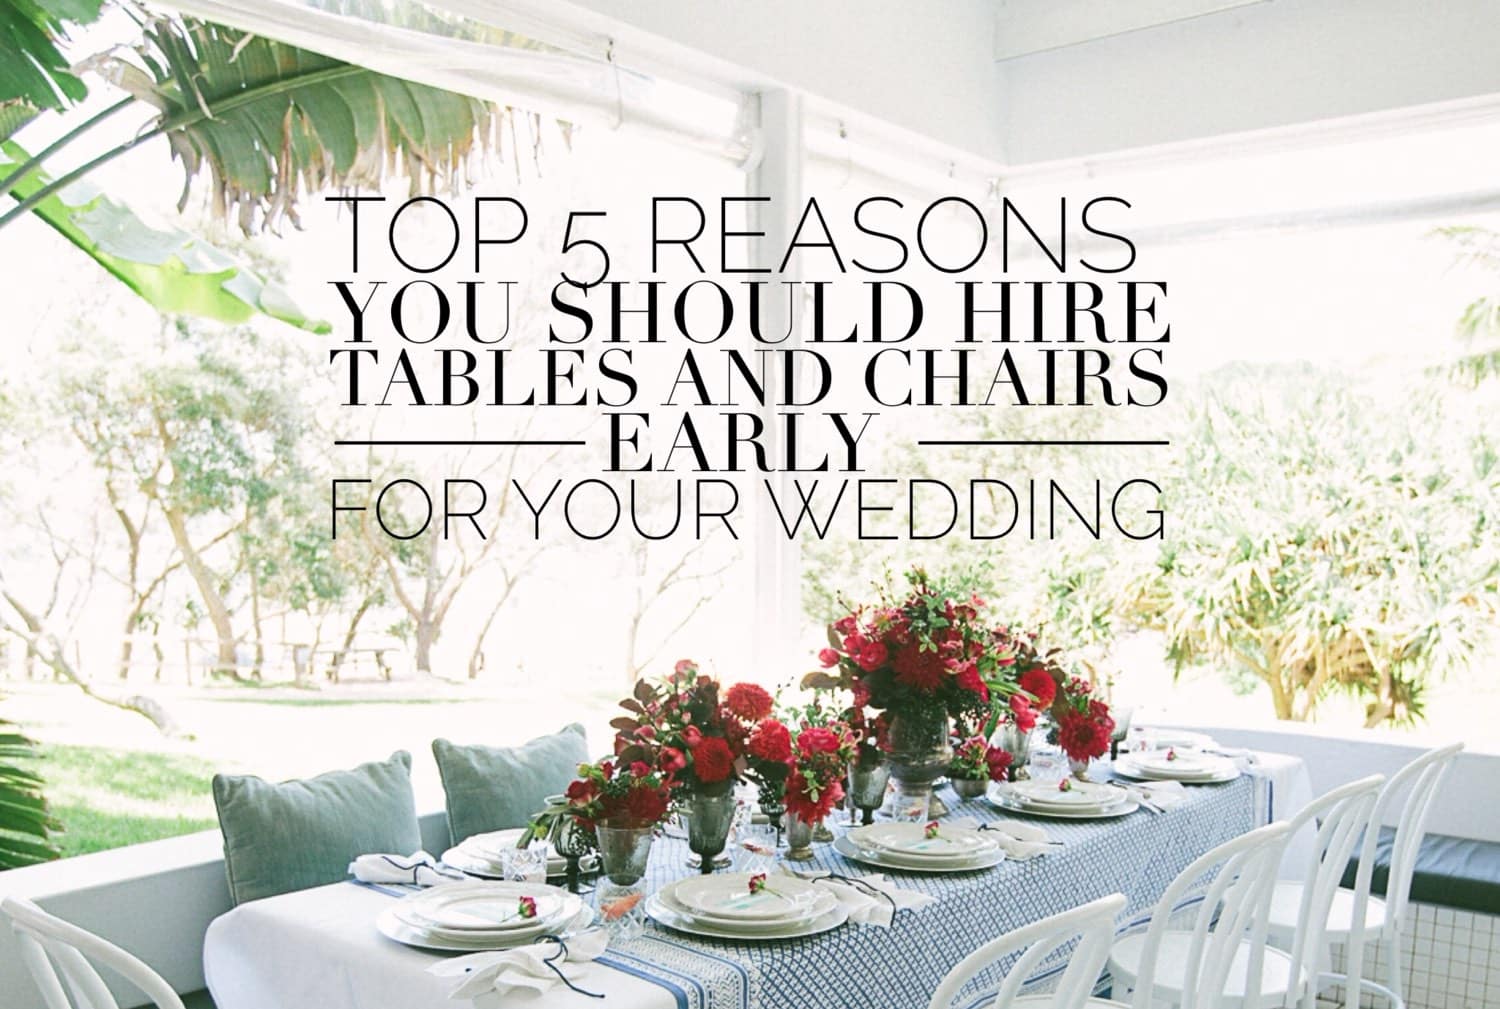 hiring-tables-and-chairs-wedding.jpg